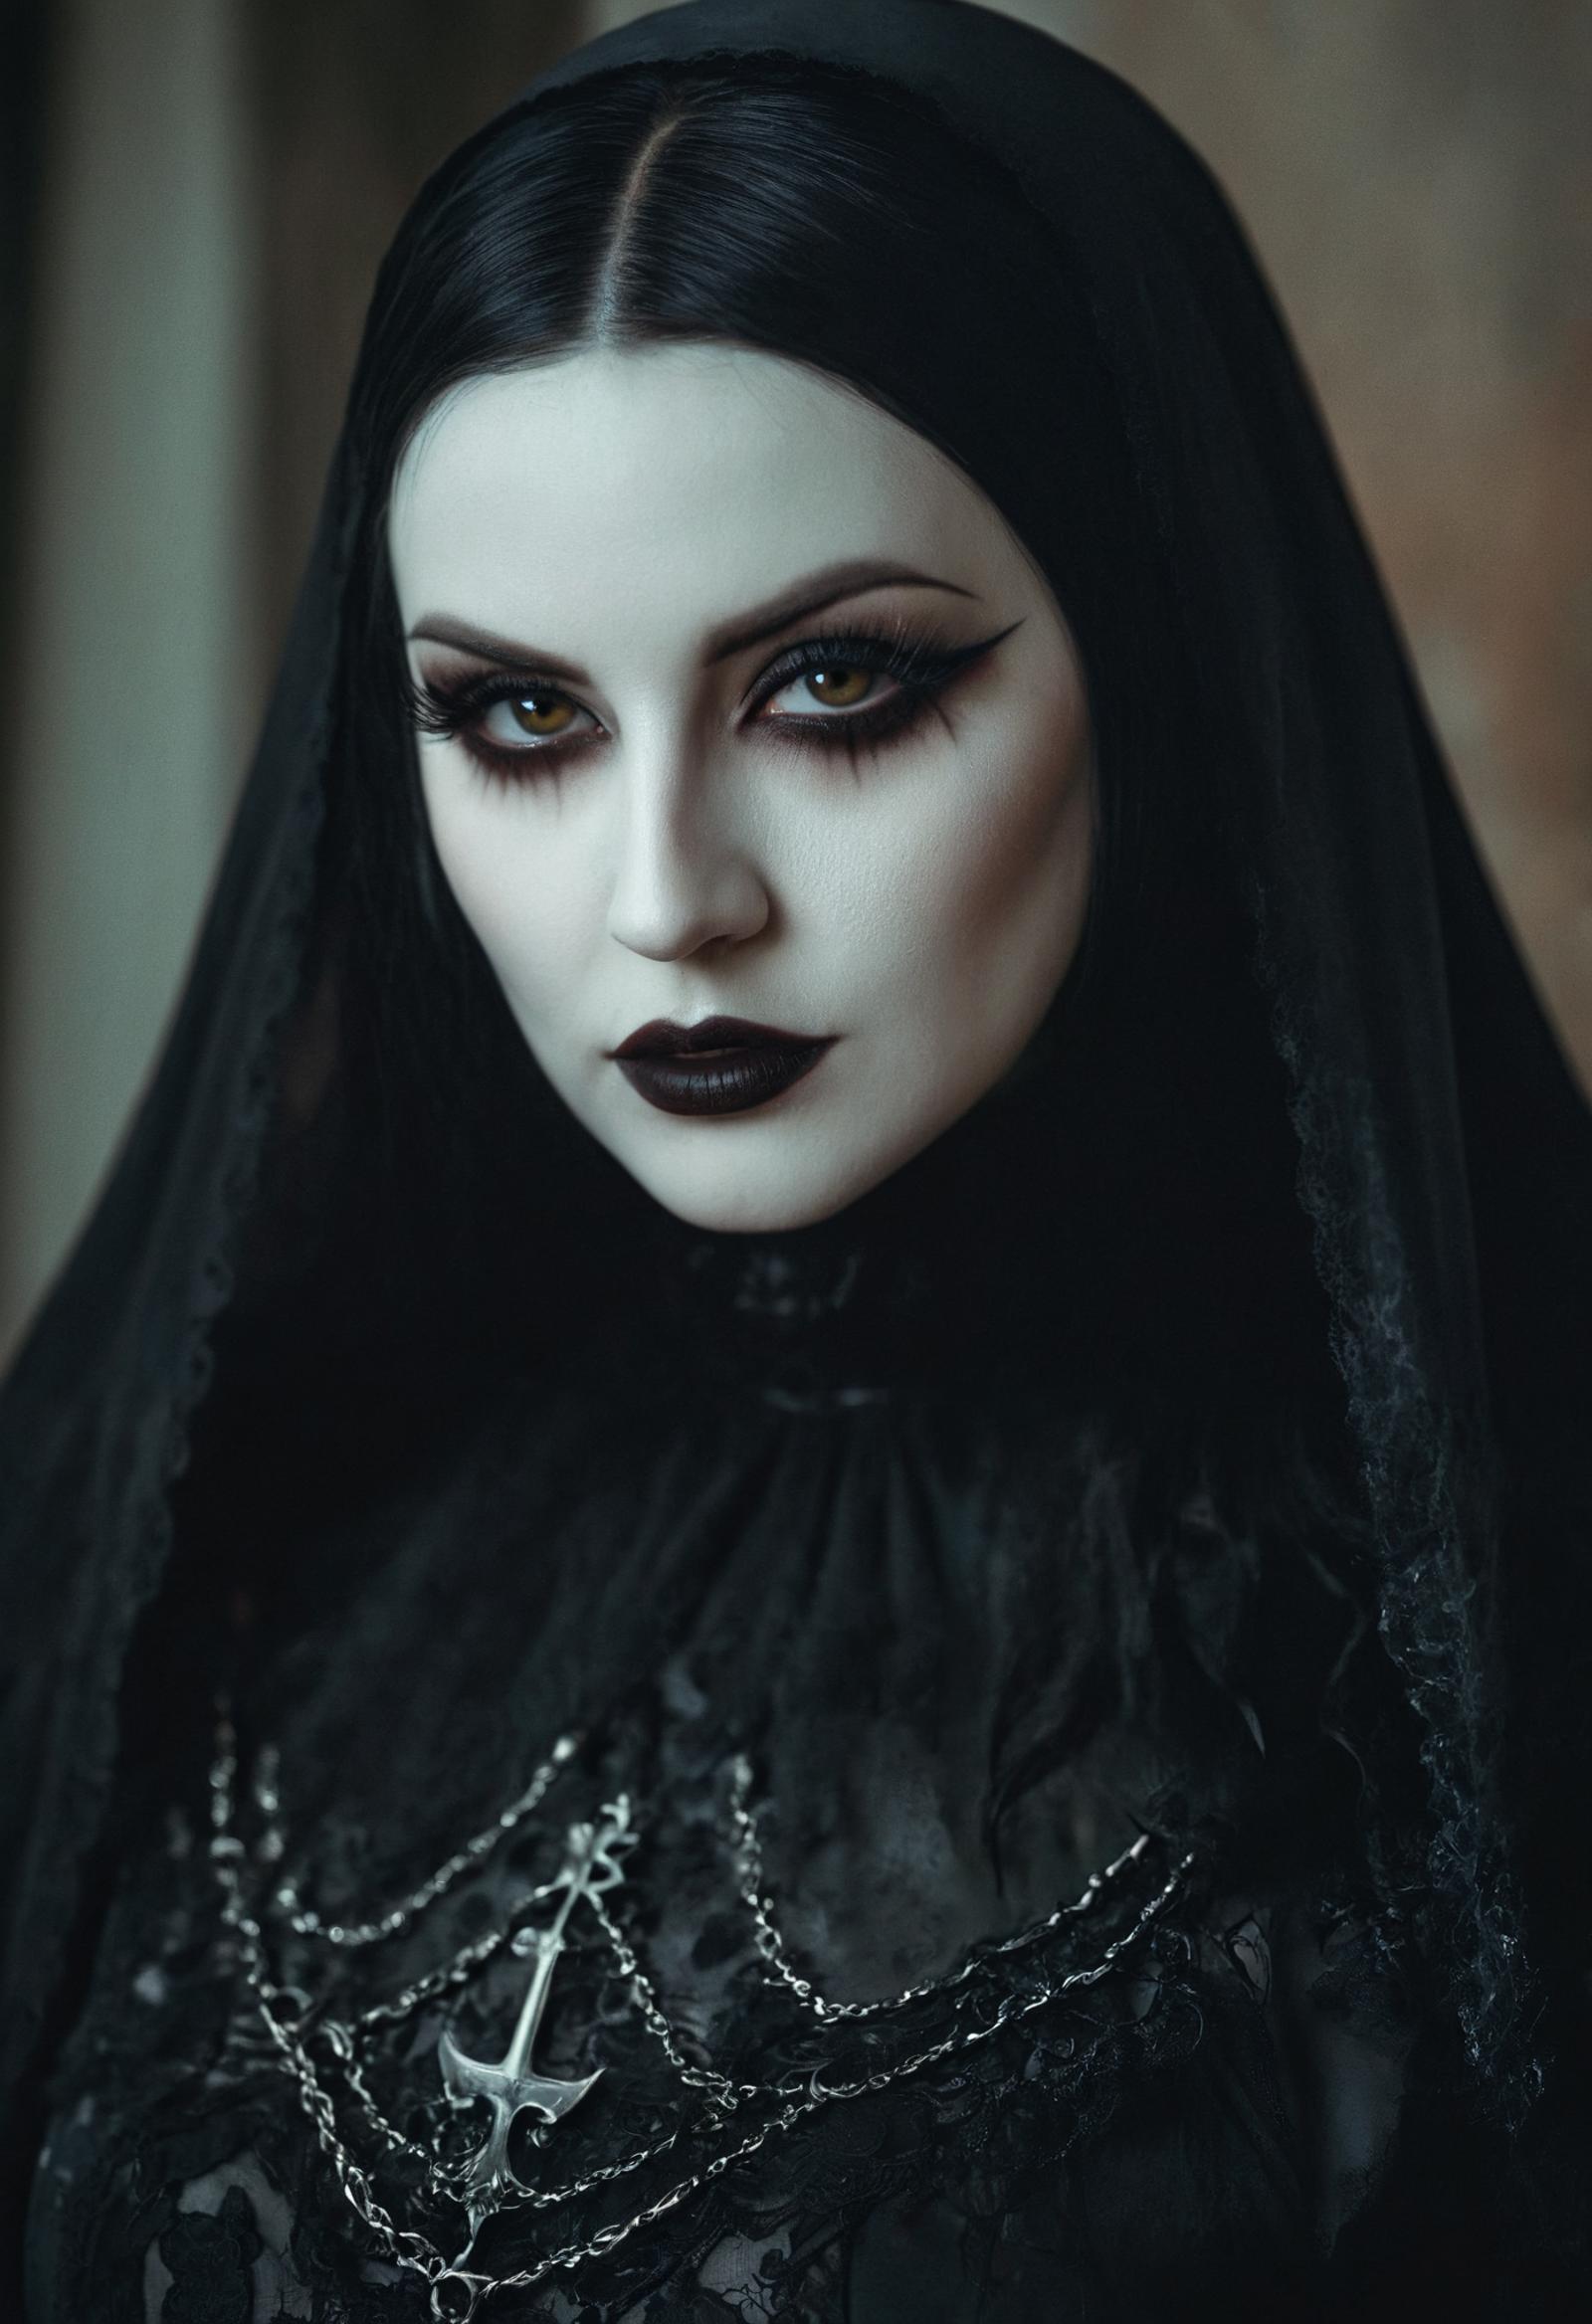 A dark-haired woman with black lipstick and a black veil on her head.